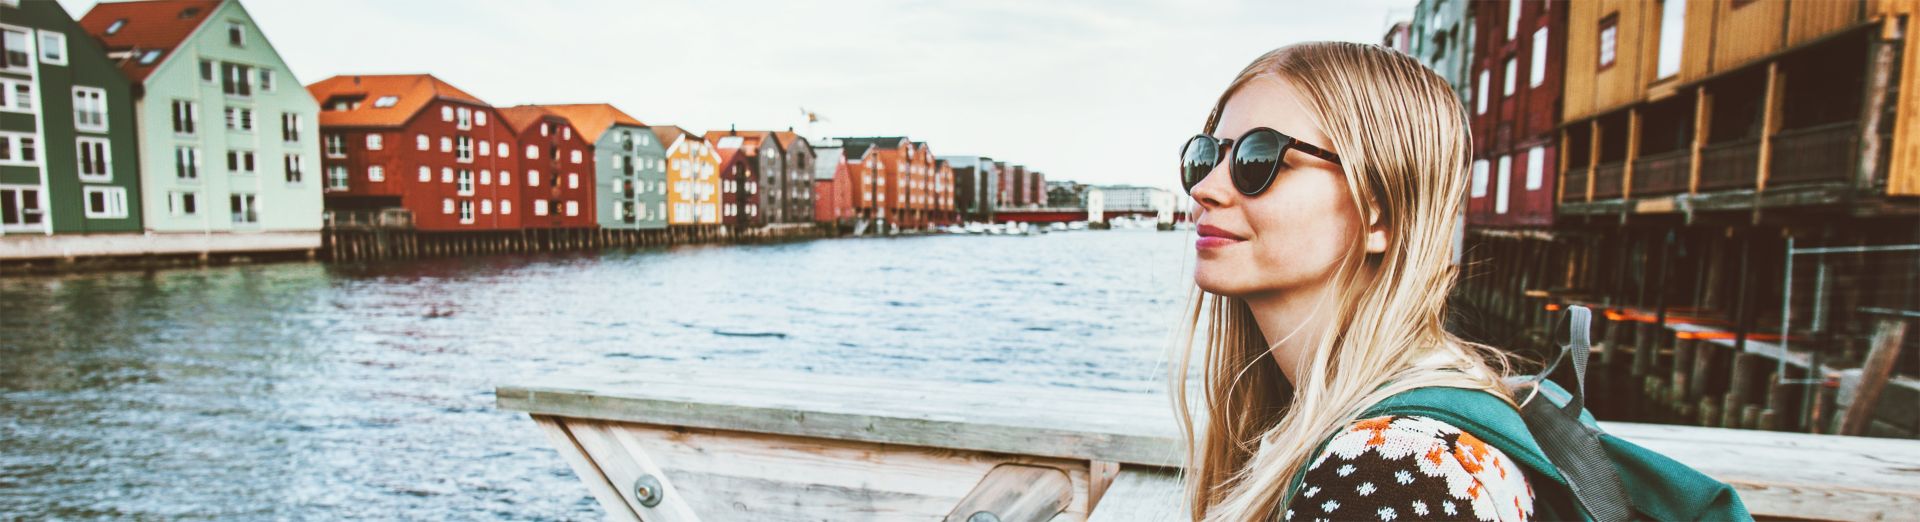 Young blonde woman on vacation in Norway sightseeing Scandinavian architecture